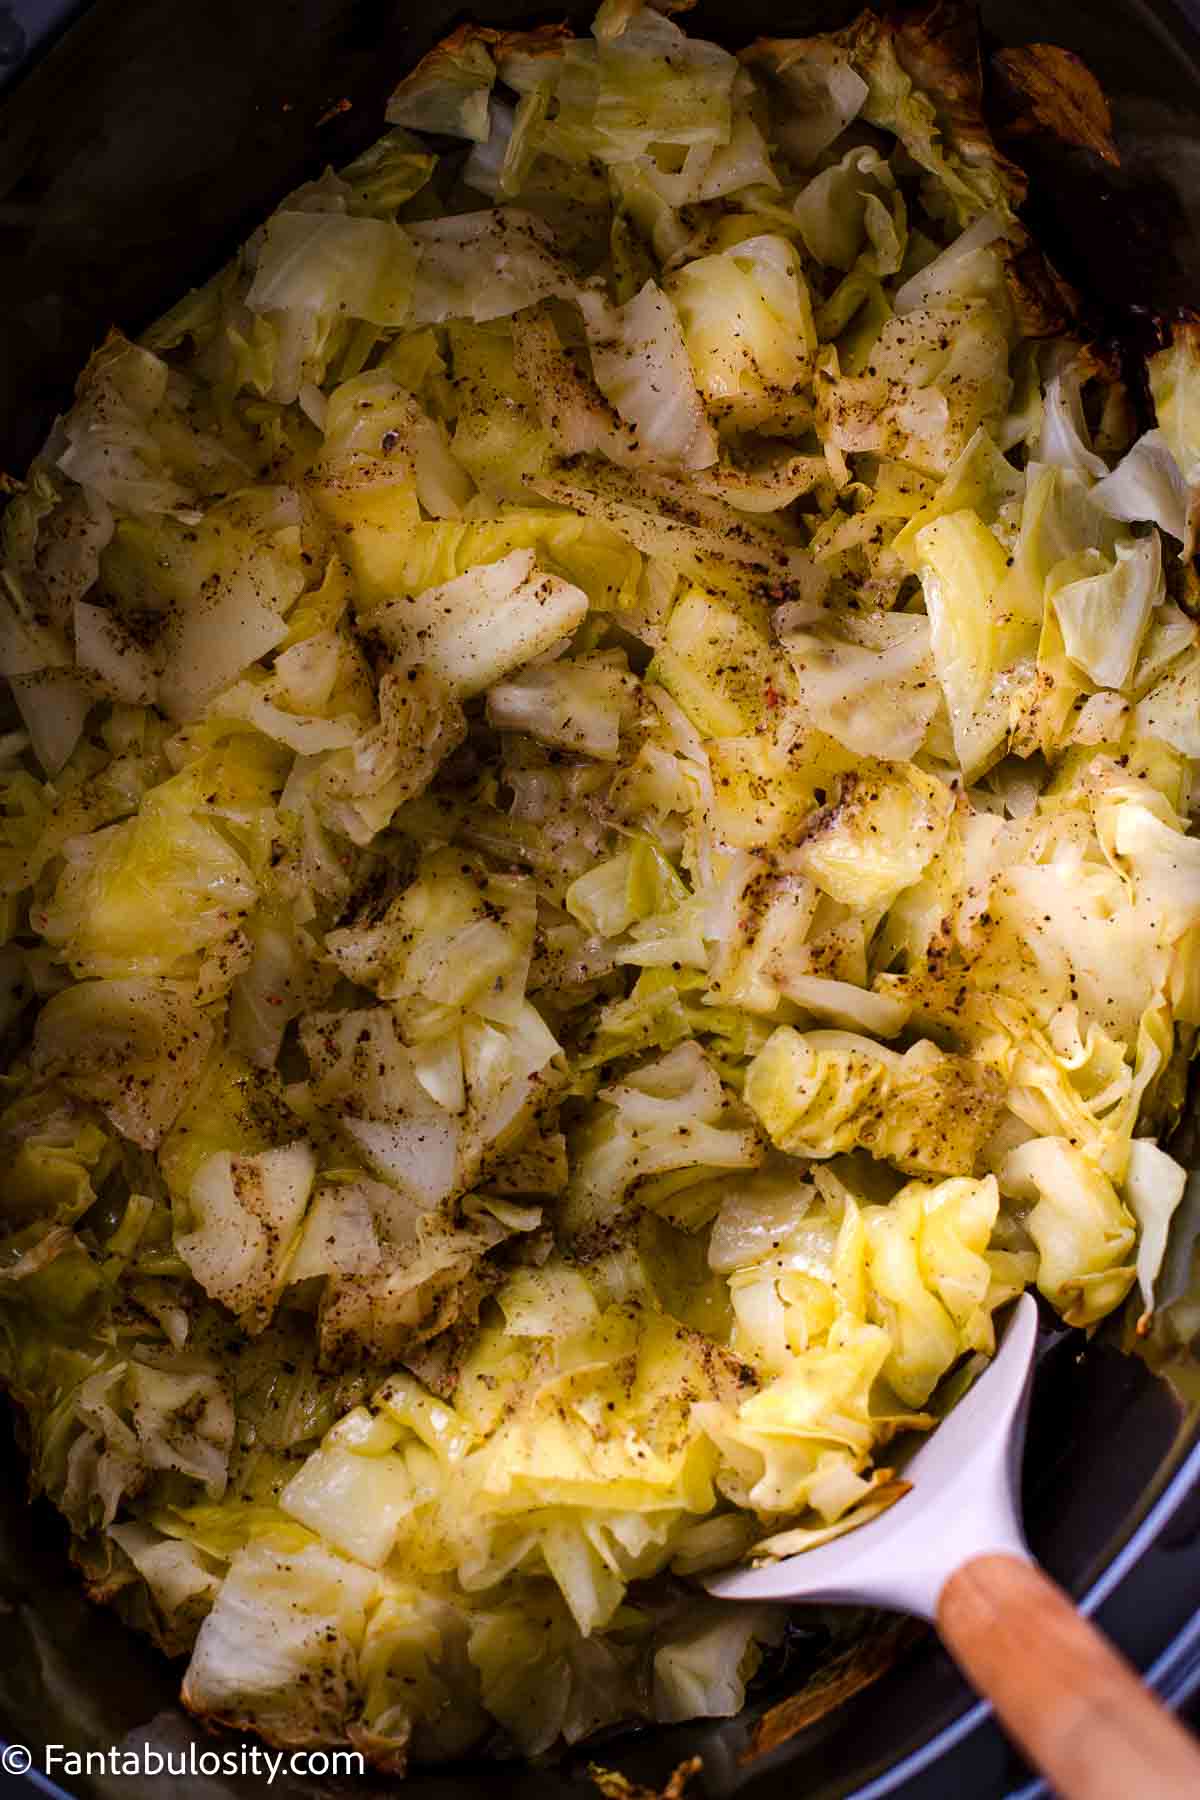 Cooked cut up cabbage in slow cooker.